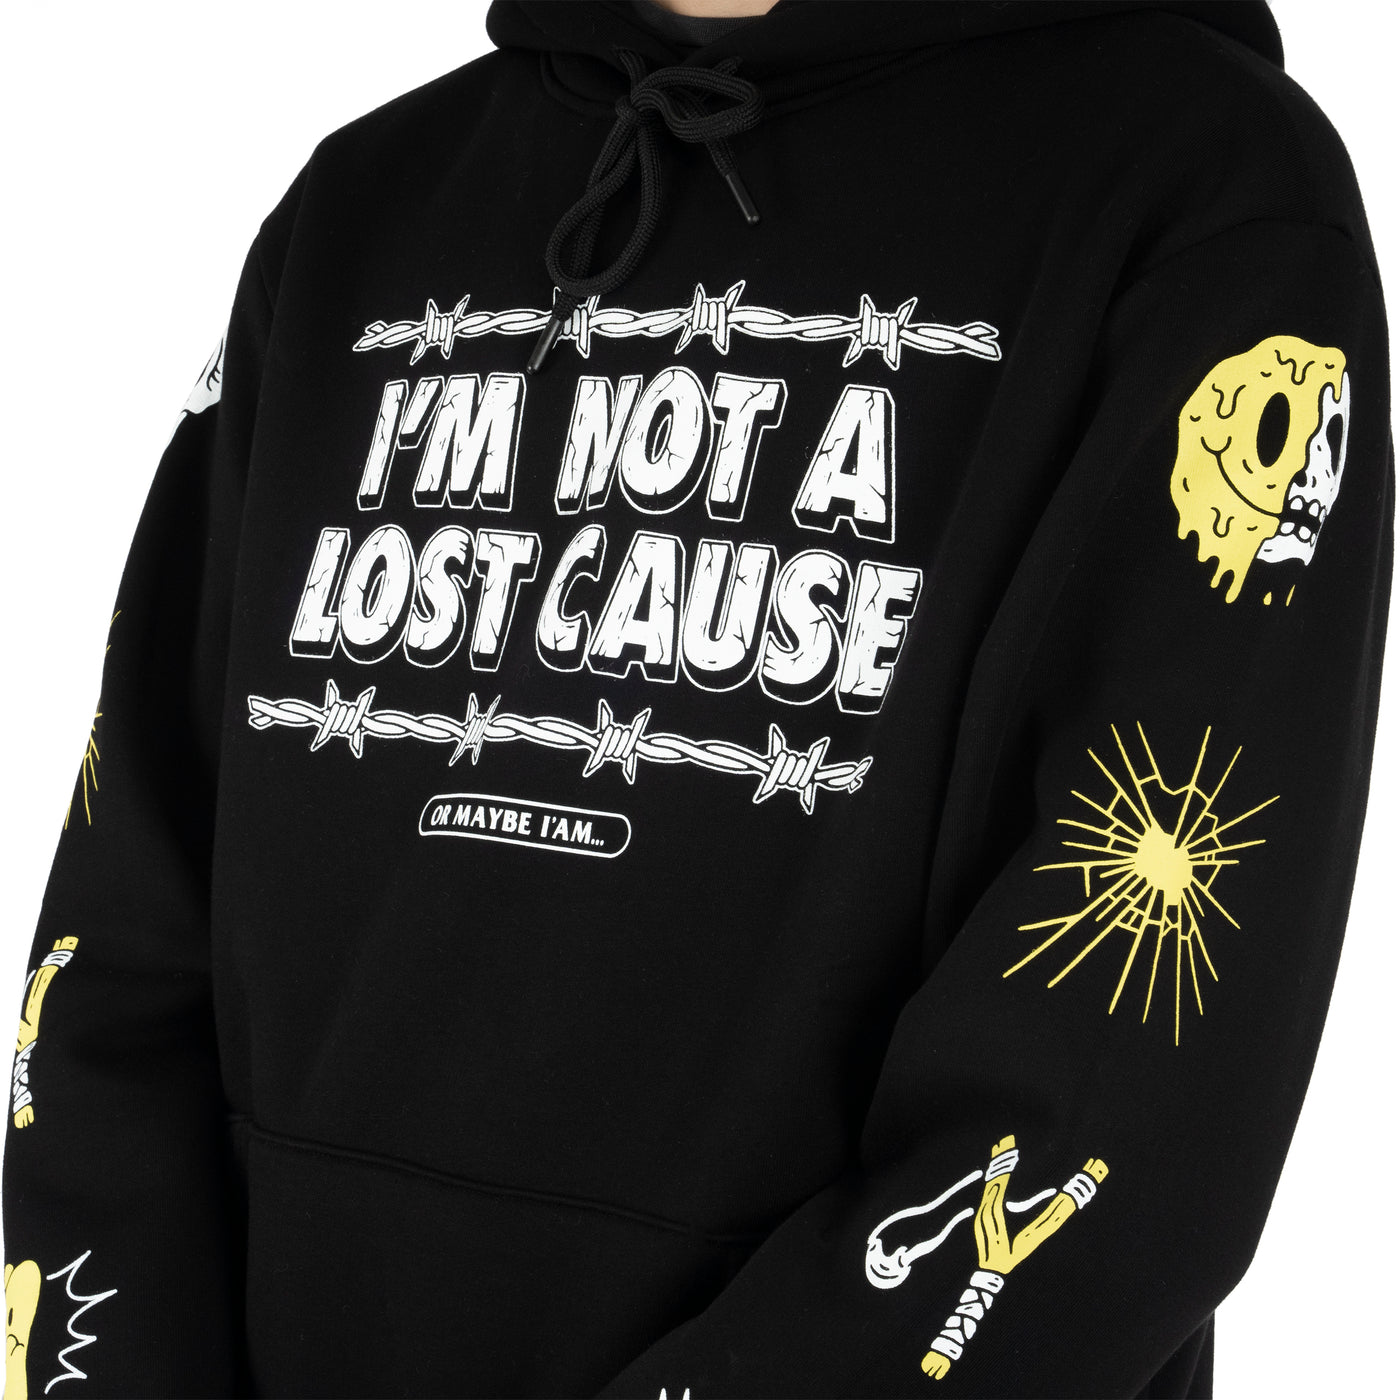 Not a Lost Cause - Hoodie